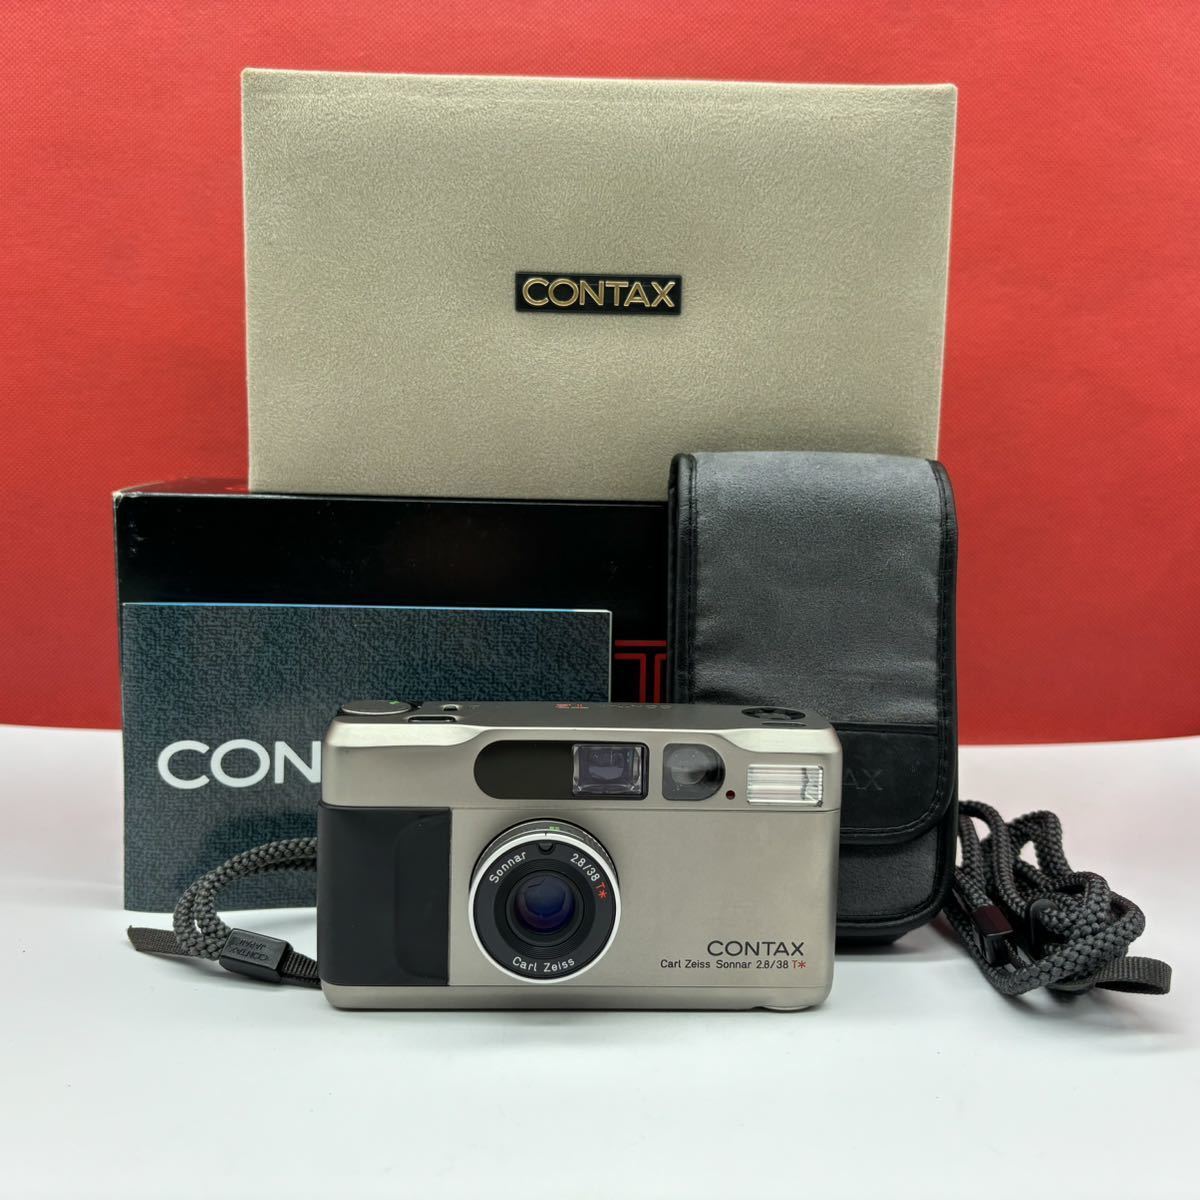 ◆ CONTAX T2 コンパクトフィルムカメラ Carl Zeiss Sonnar 2.8/38 T* シャッター、フラッシュOK 箱付き コンタックス_画像1